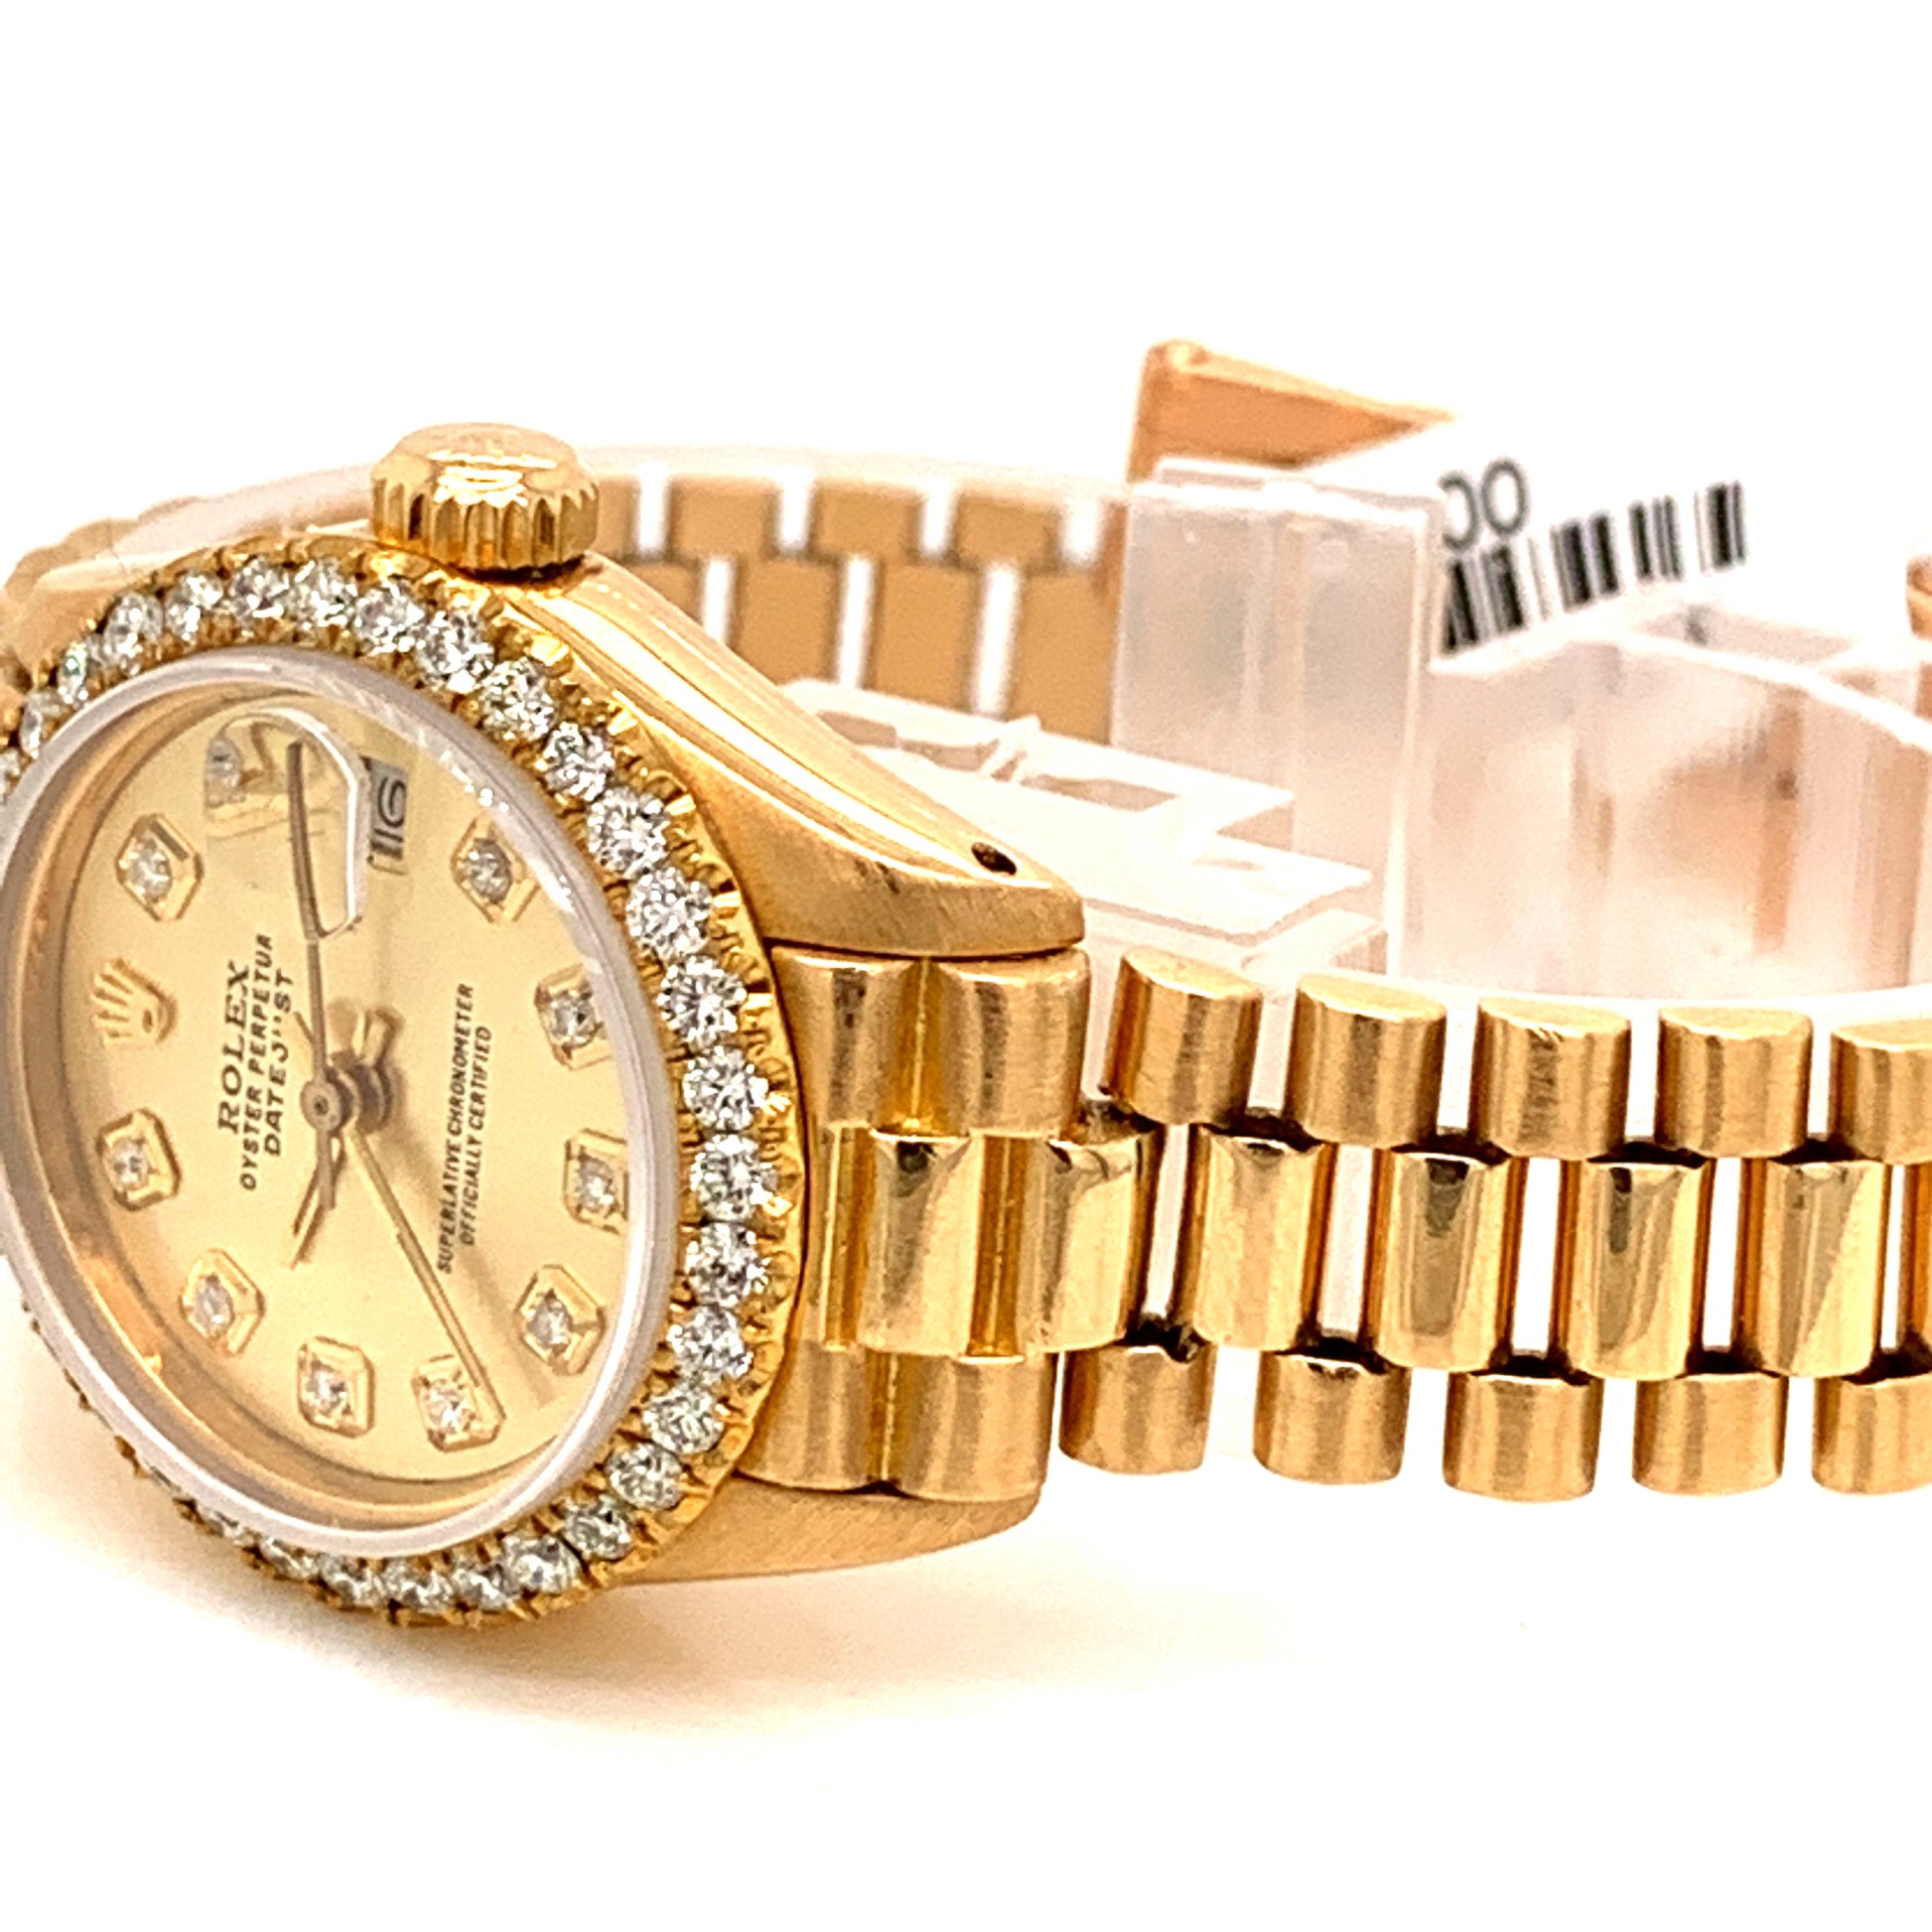 18k yellow gold and diamond ladies Oyster Perpetual Datejust Rolex 26 mm  watch with diamond and sapphire - Antique Appraisers Auctioneers